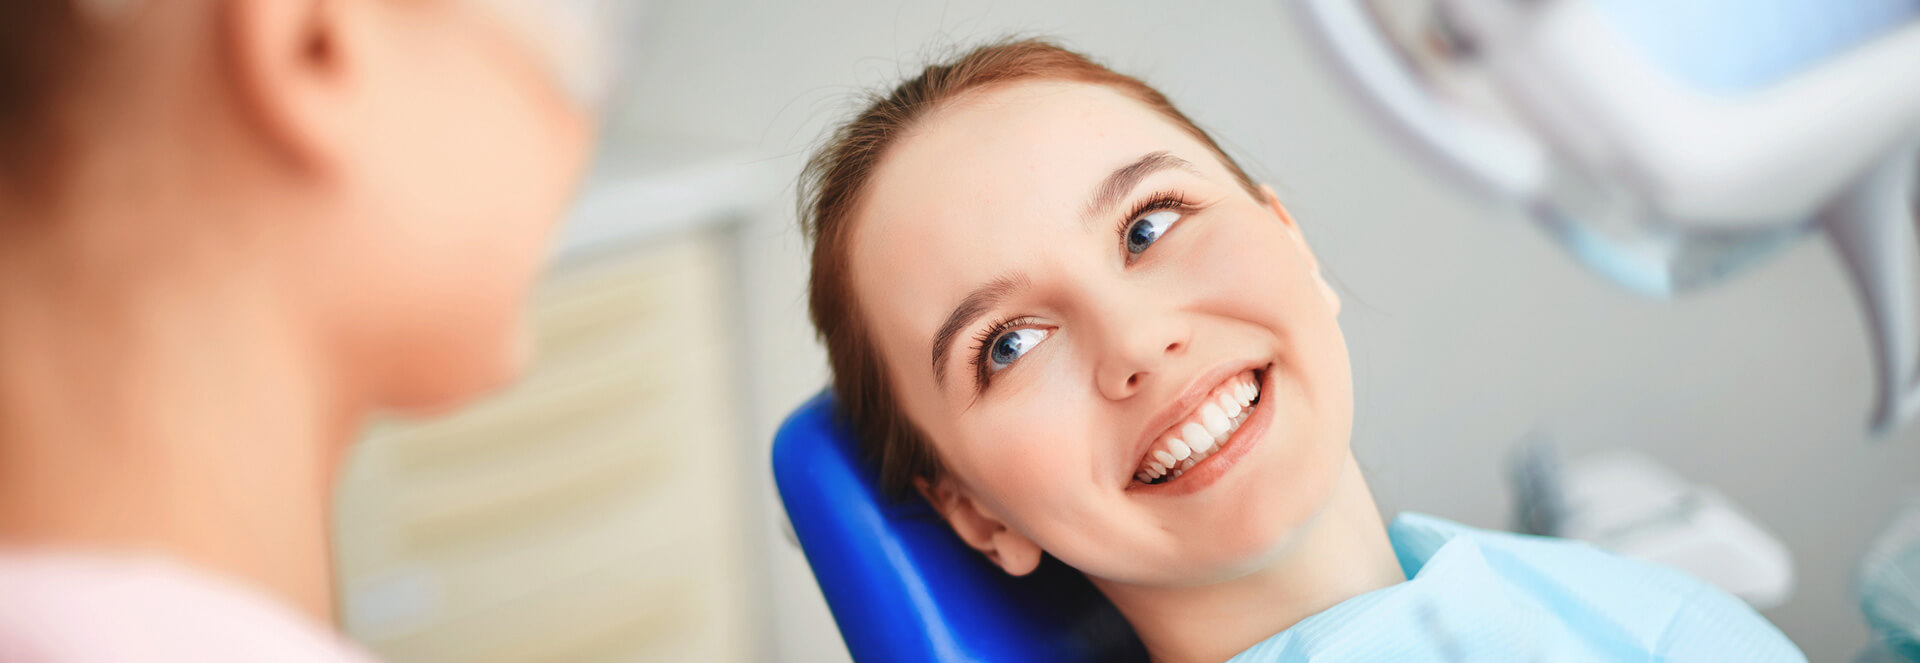 Young beautiful woman smiling seated on dental chair about to get teeth cleaned